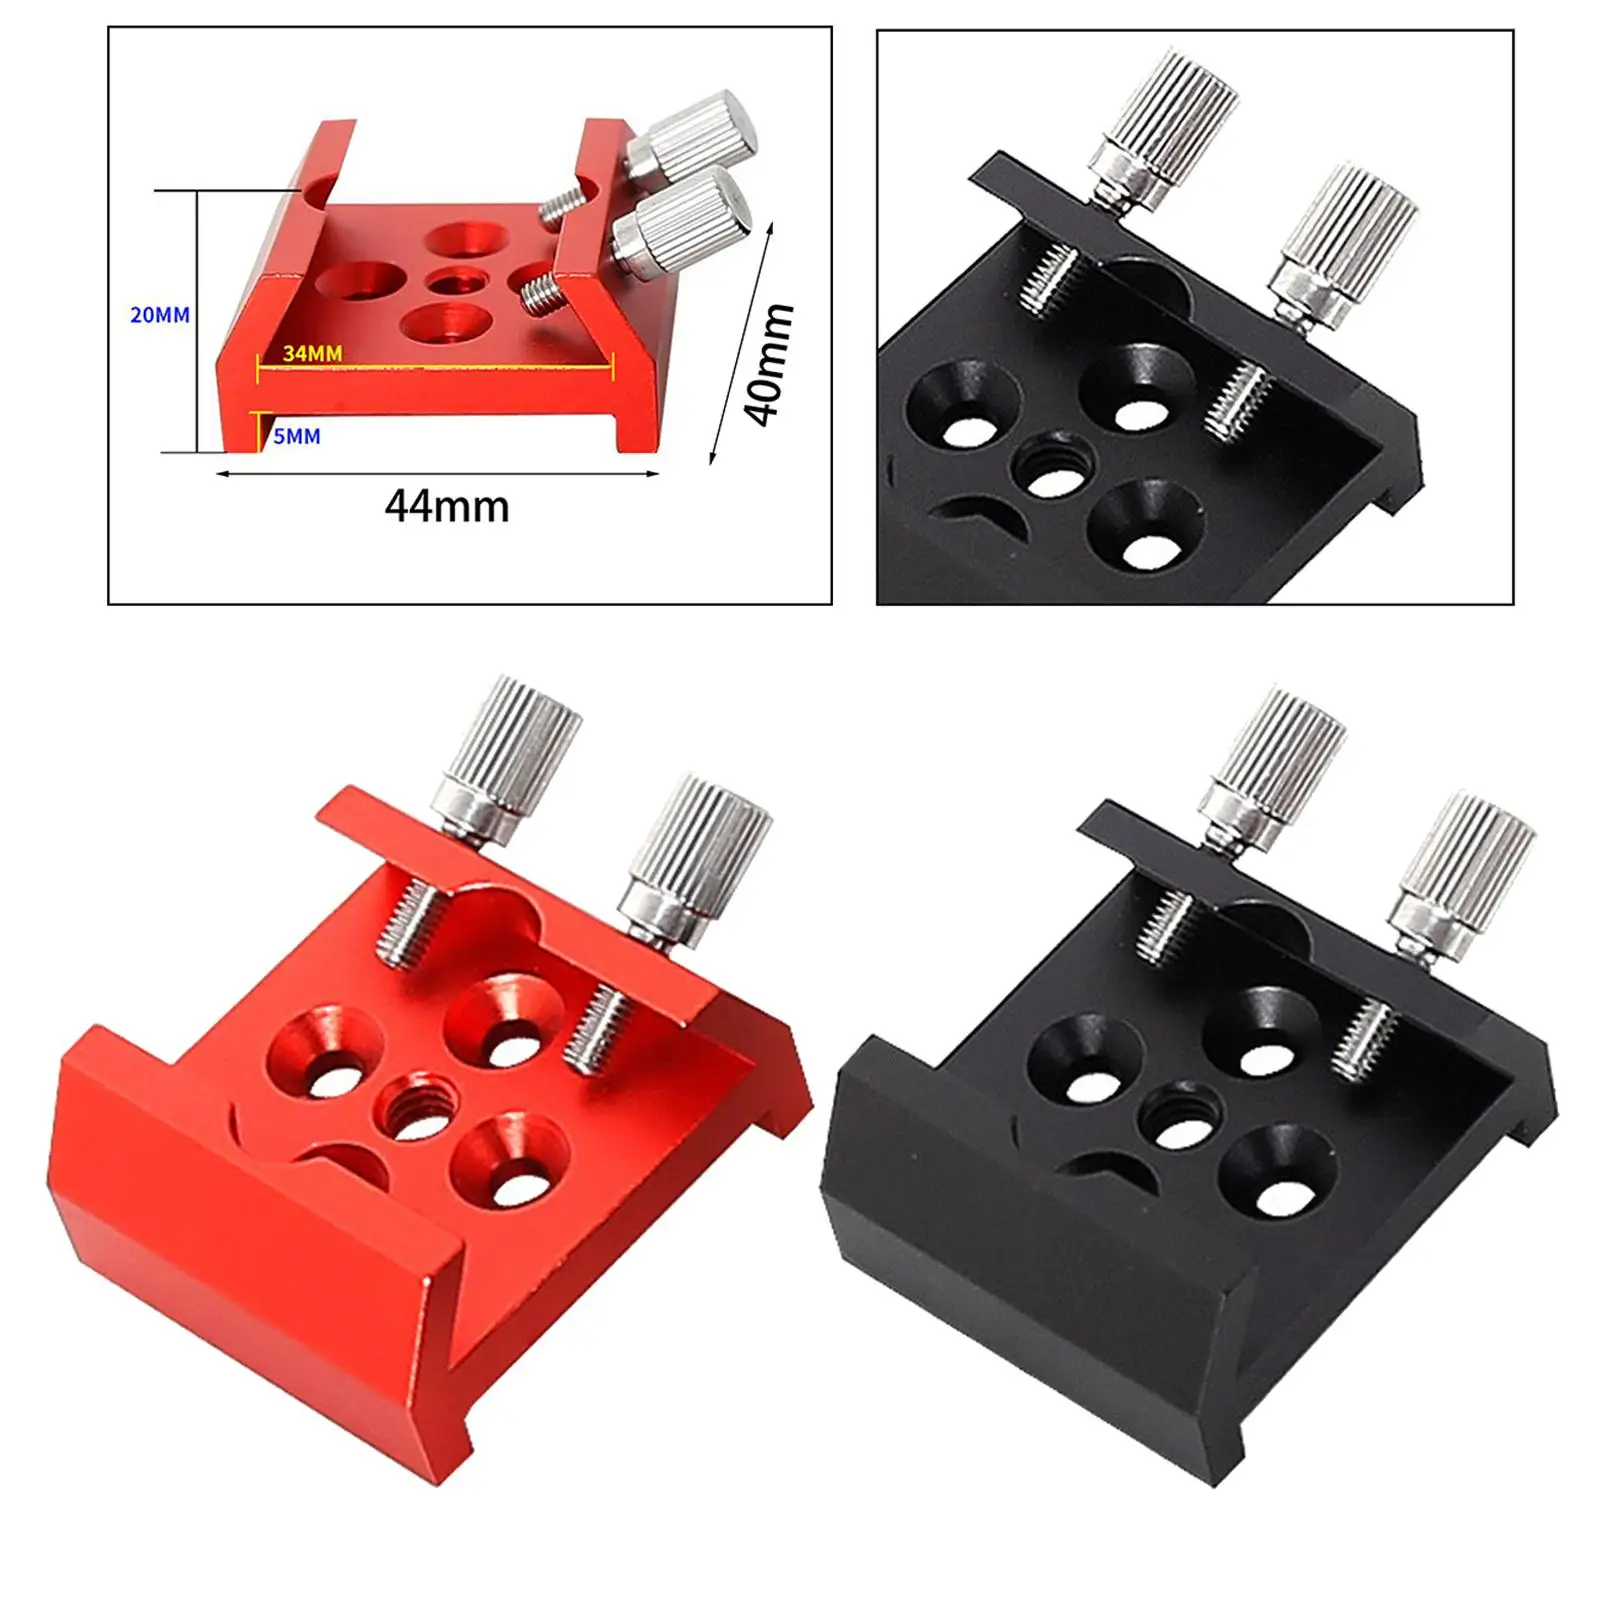 Dovetail base for telescope finder scope replaces long-lasting ones